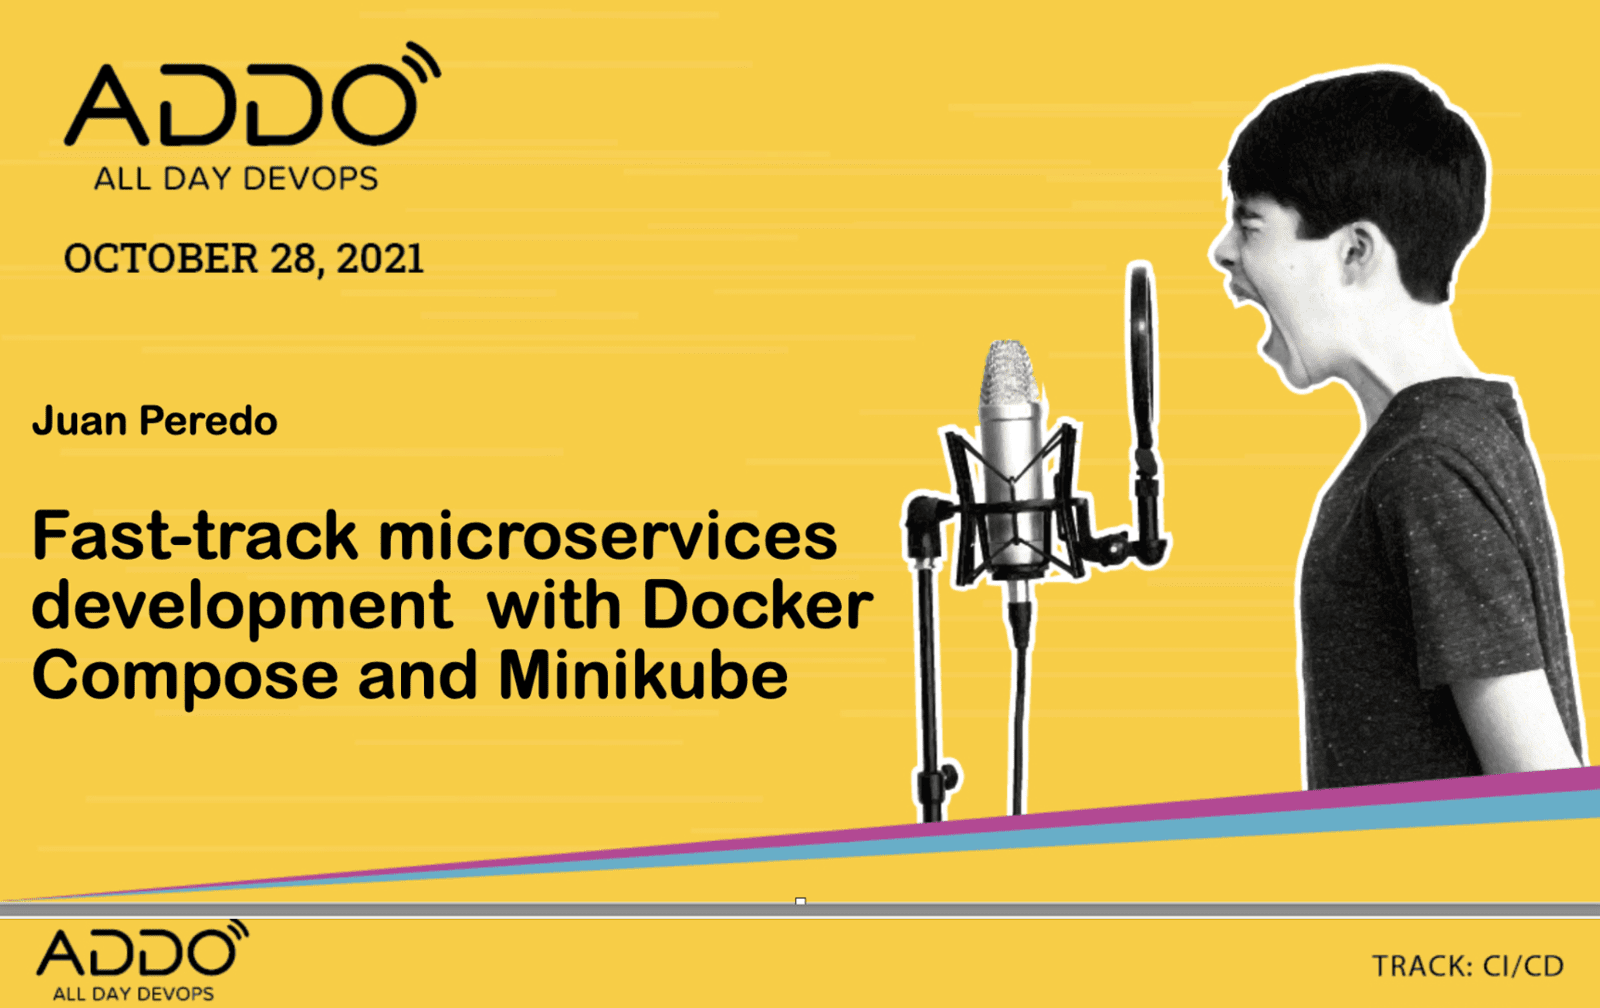 Fast-track microservices development with Docker Compose and Minikube